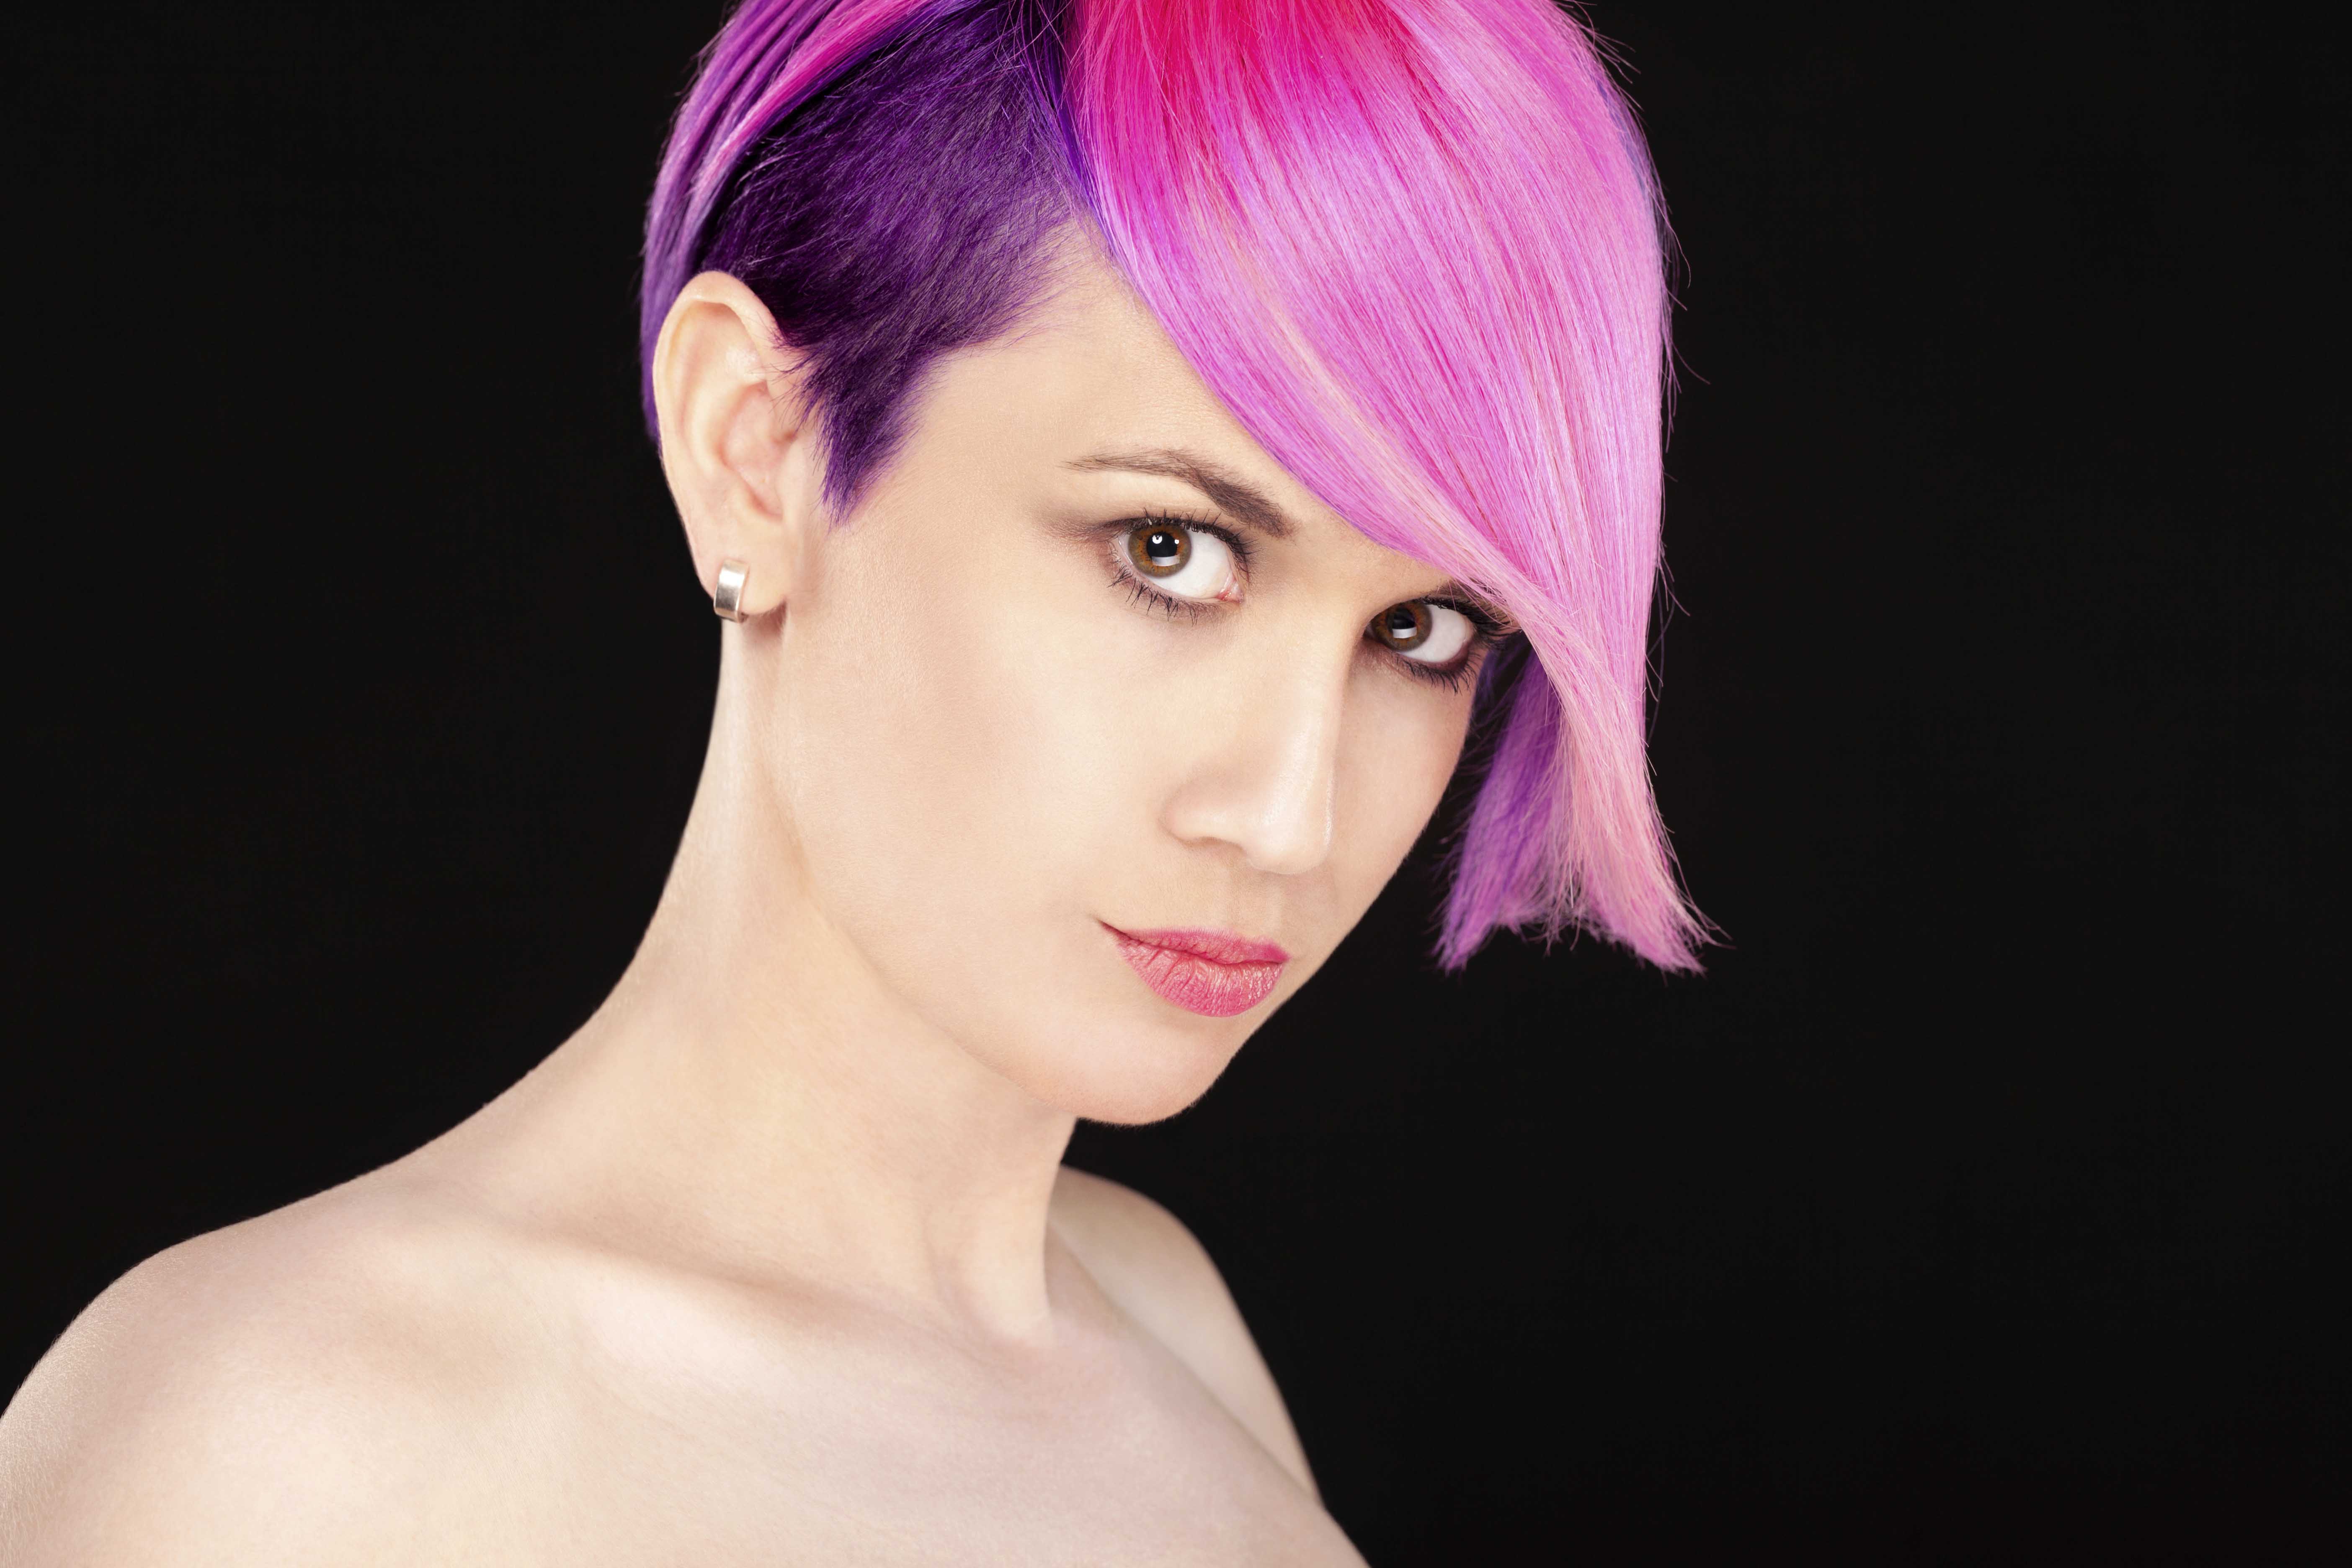 Cotton Candy Dreams: Why Light Pink Hair Dye Works on Natural Brunettes